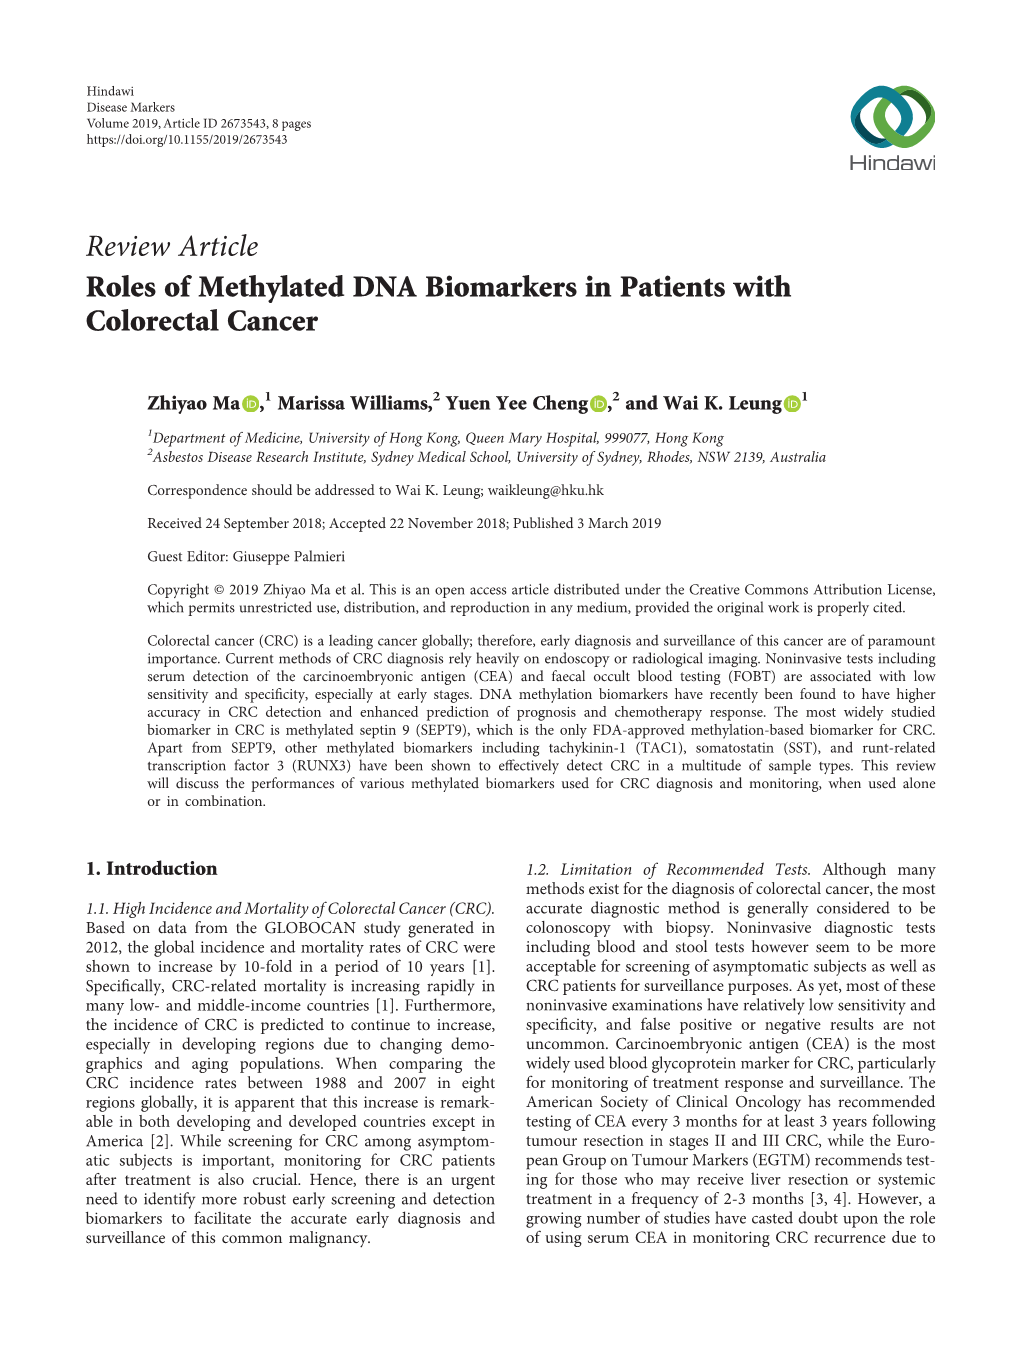 Review Article Roles of Methylated DNA Biomarkers in Patients with Colorectal Cancer